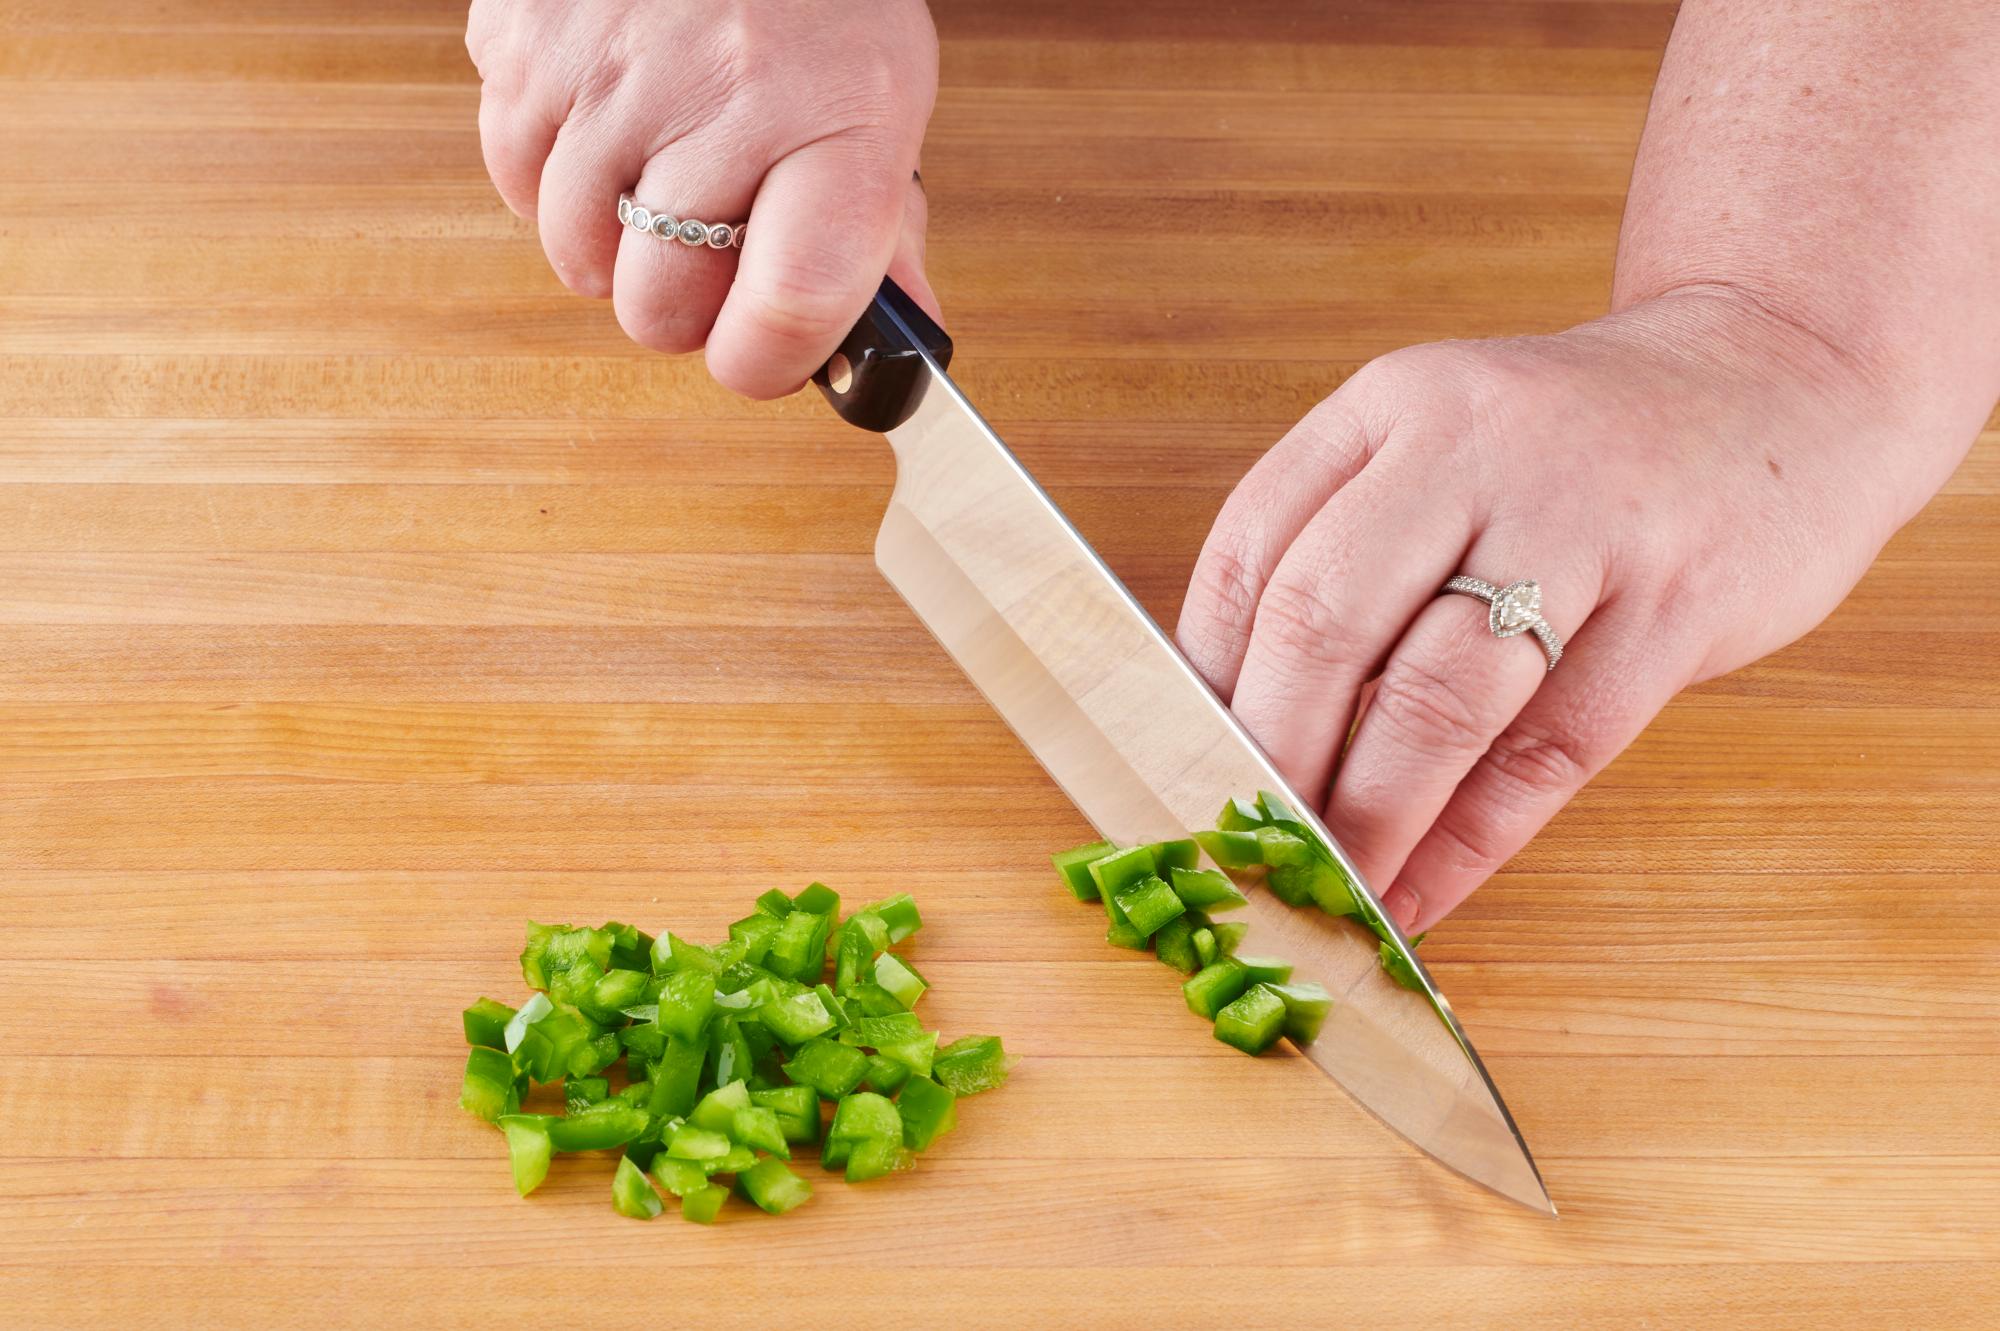 Dicing the green pepper with a Petite Chef.